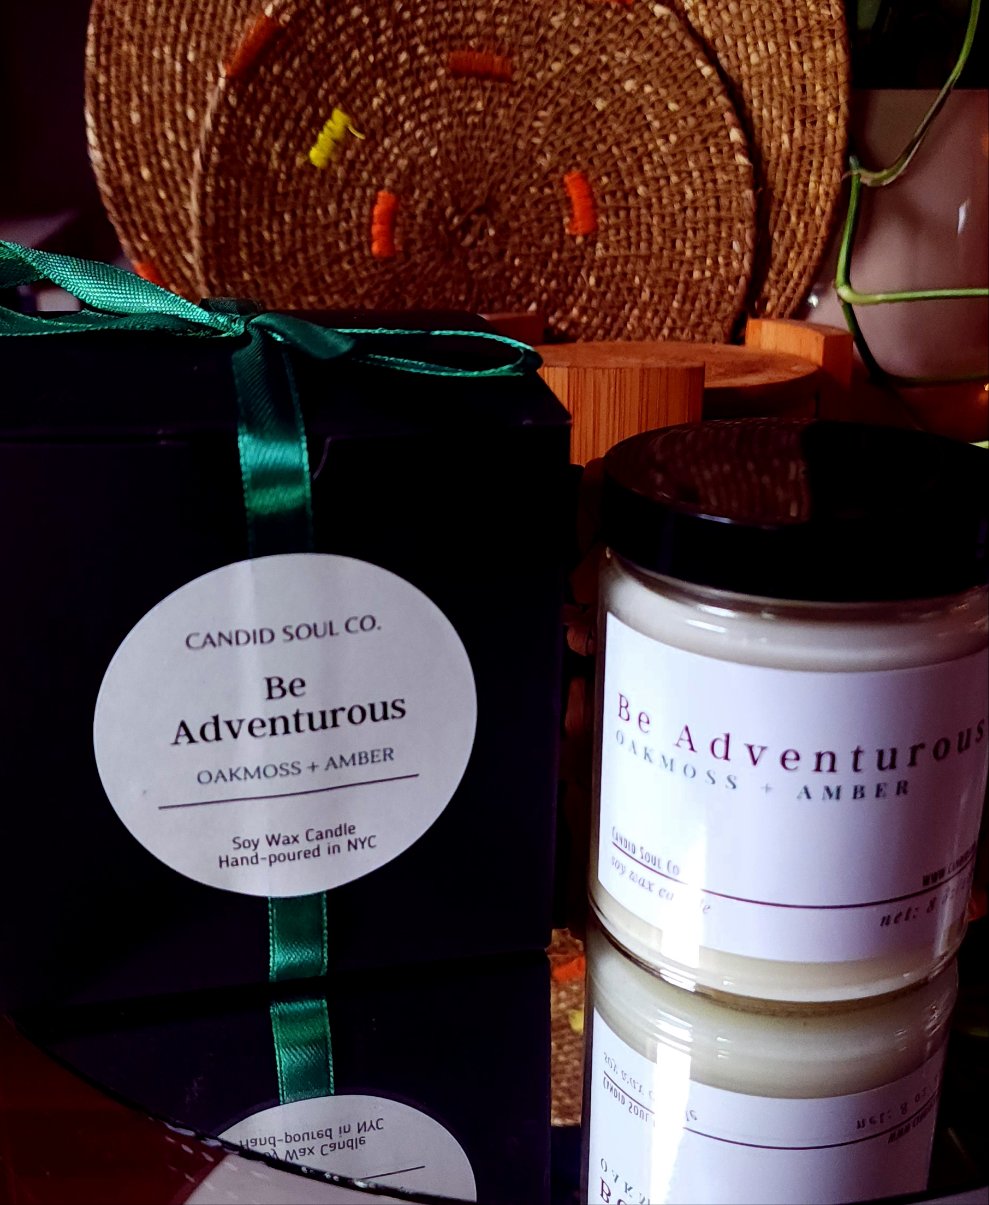 Oakmoss + Amber Be adventurous Candid Soil Soy Wax candle. with gift box